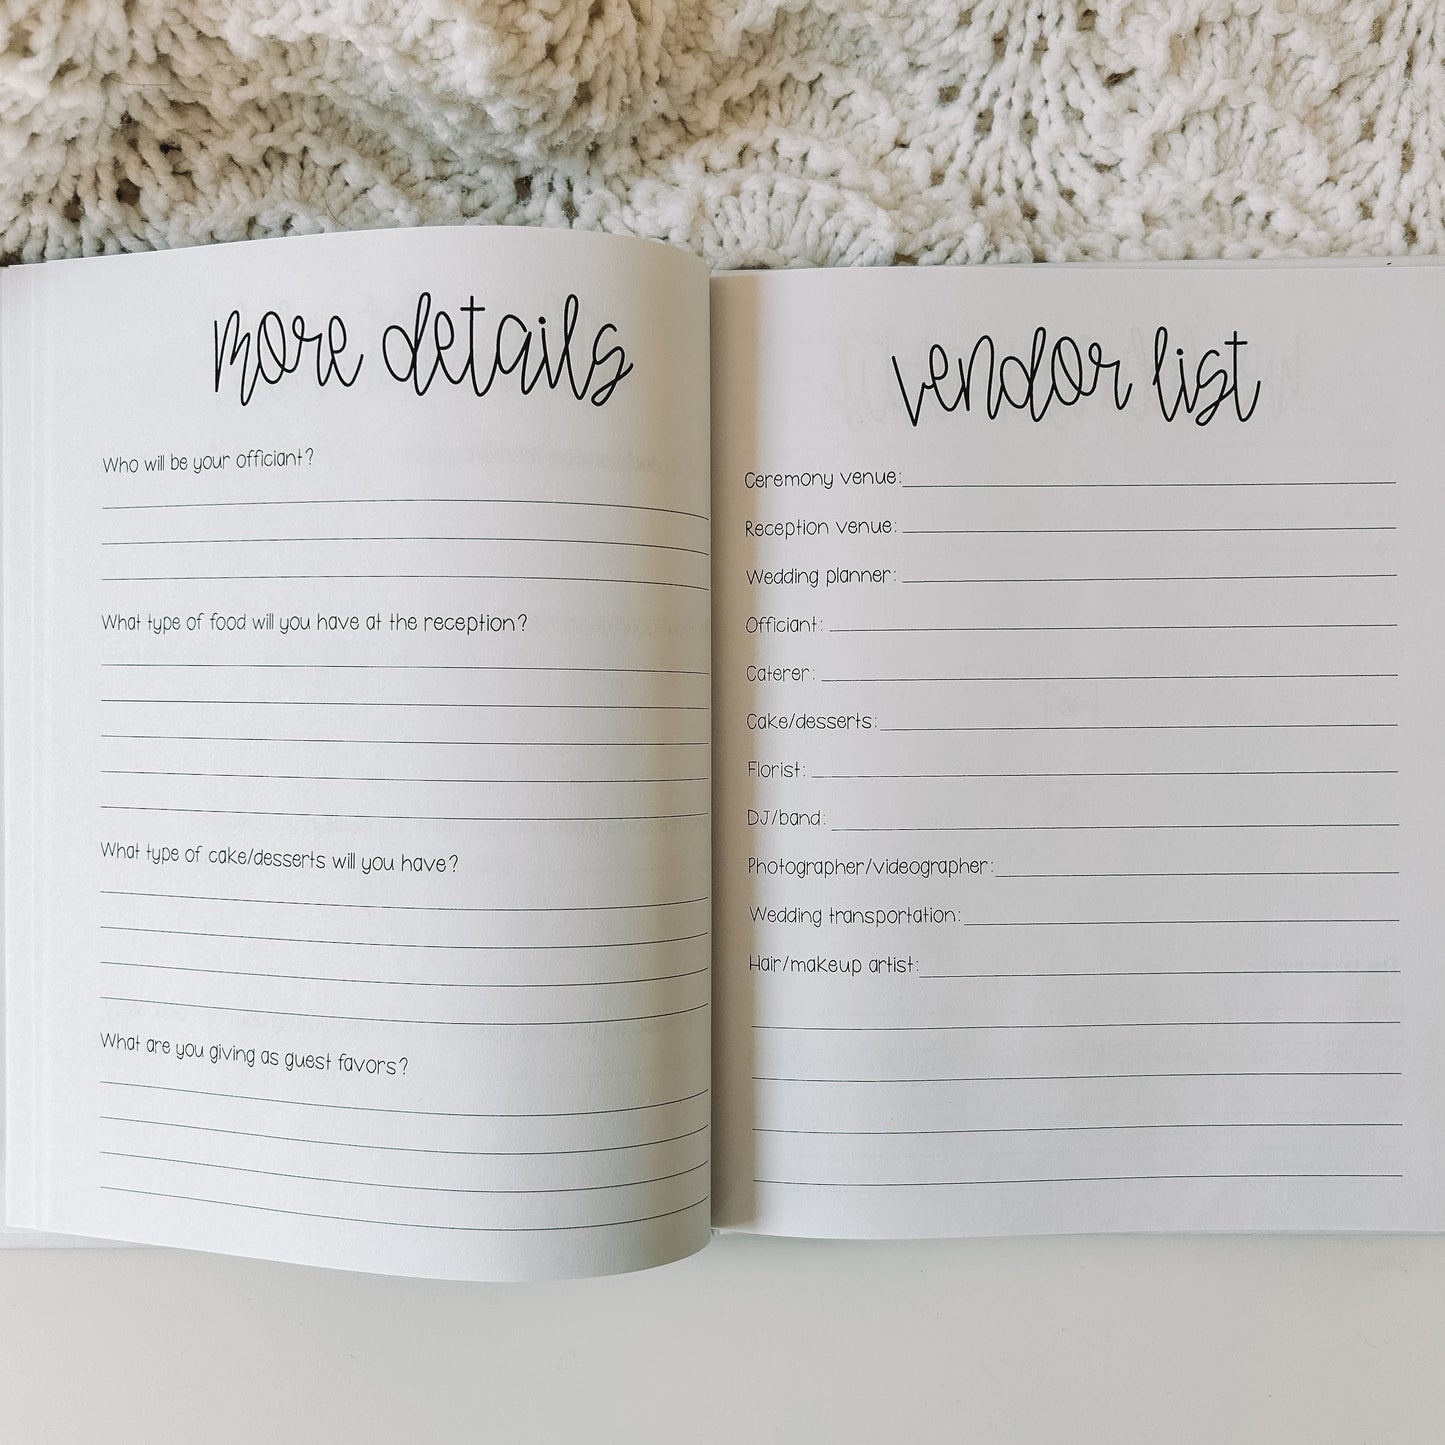 Two page spread in prompted engagement journal. Left page is titled more details with prompts and blank lines. Right page is titled vendor list with wedding vendors types listed and a blank line next to each.